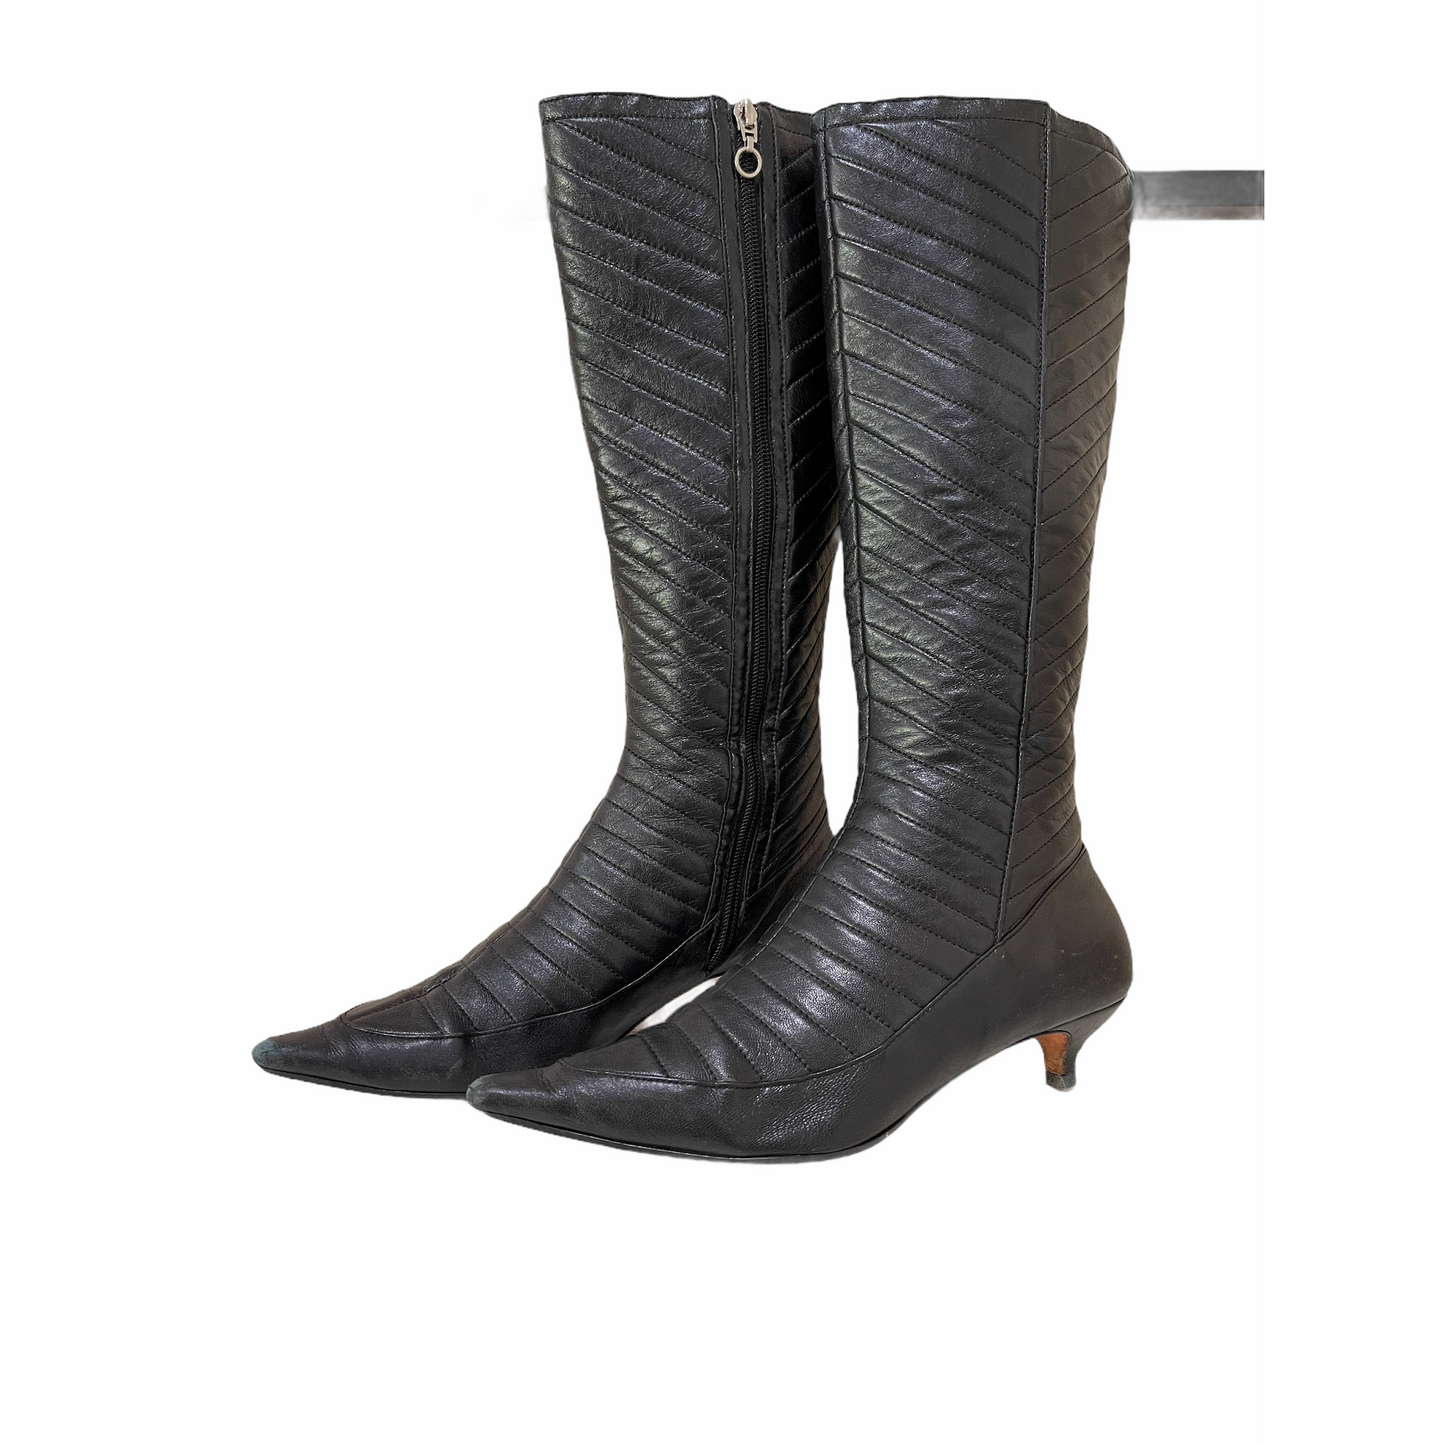 Heeled Boots-Ribbed Design-Black Leather Material-By Constanca Basto